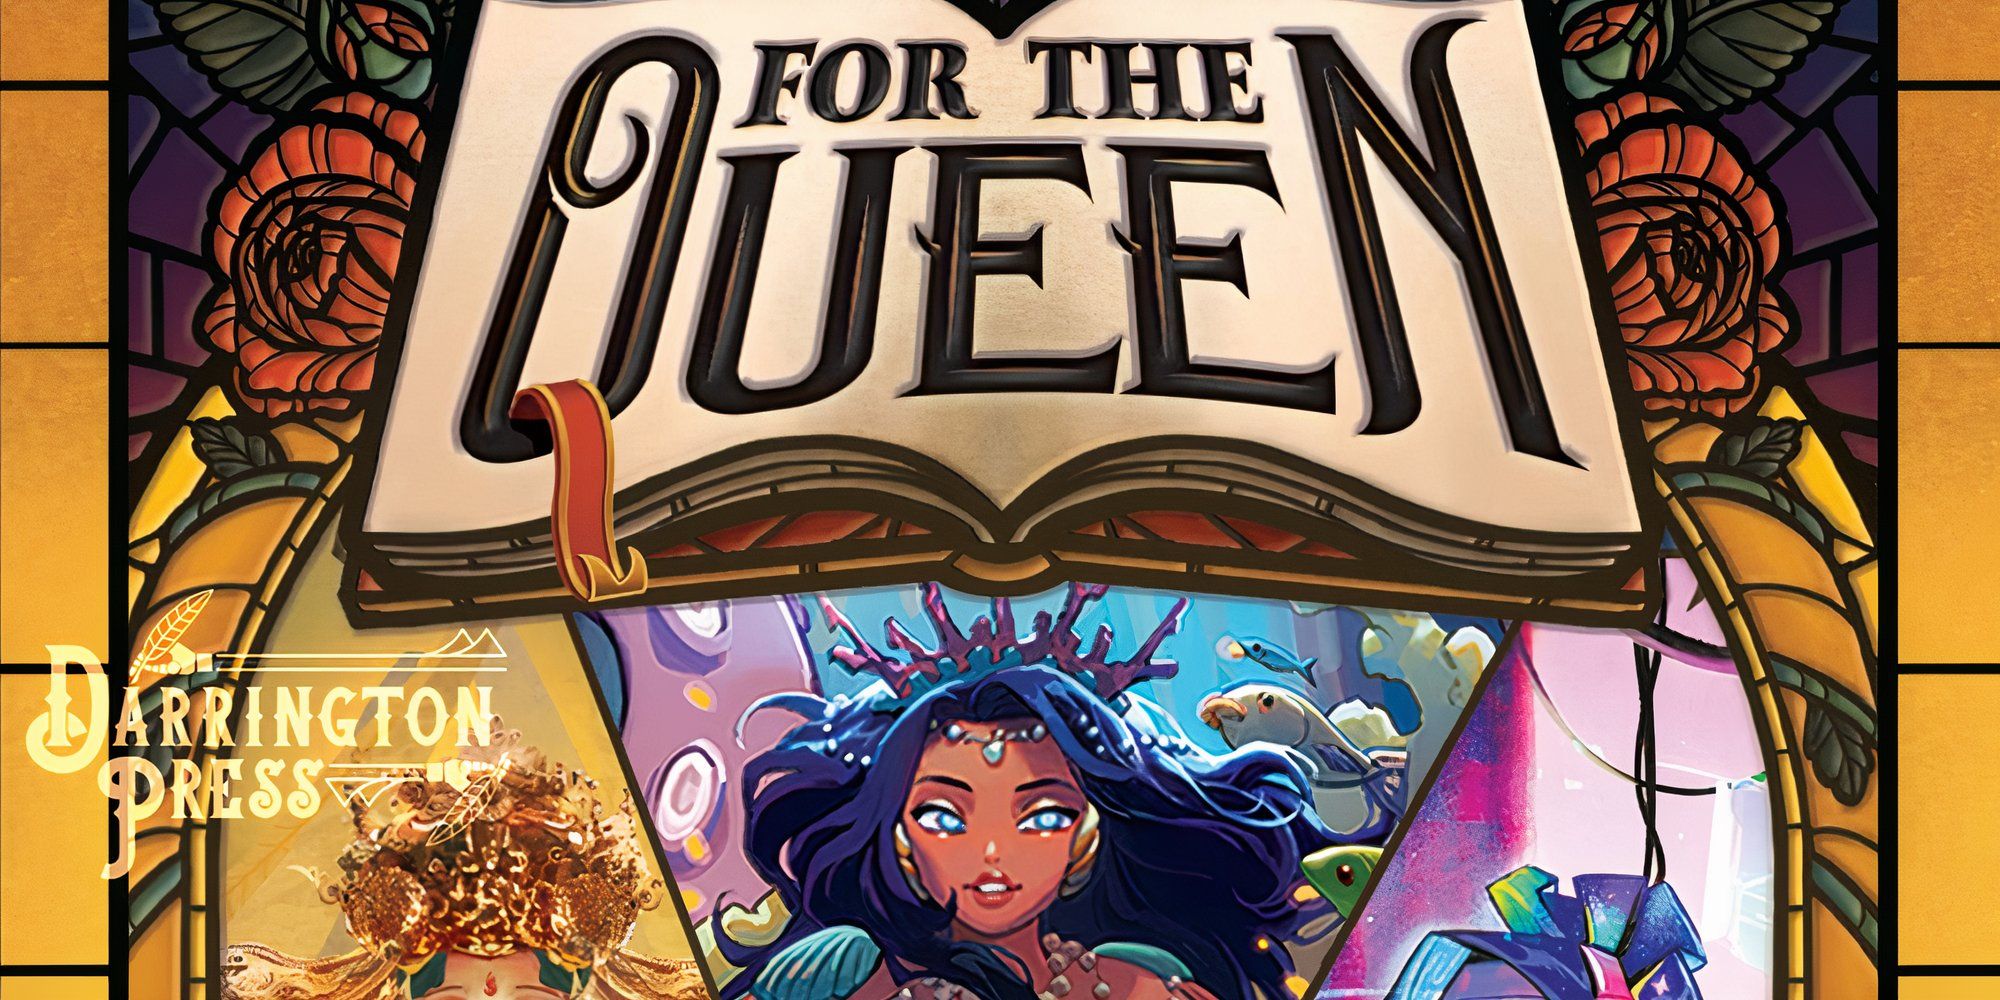 Darrington Press's For the Queen Card Game